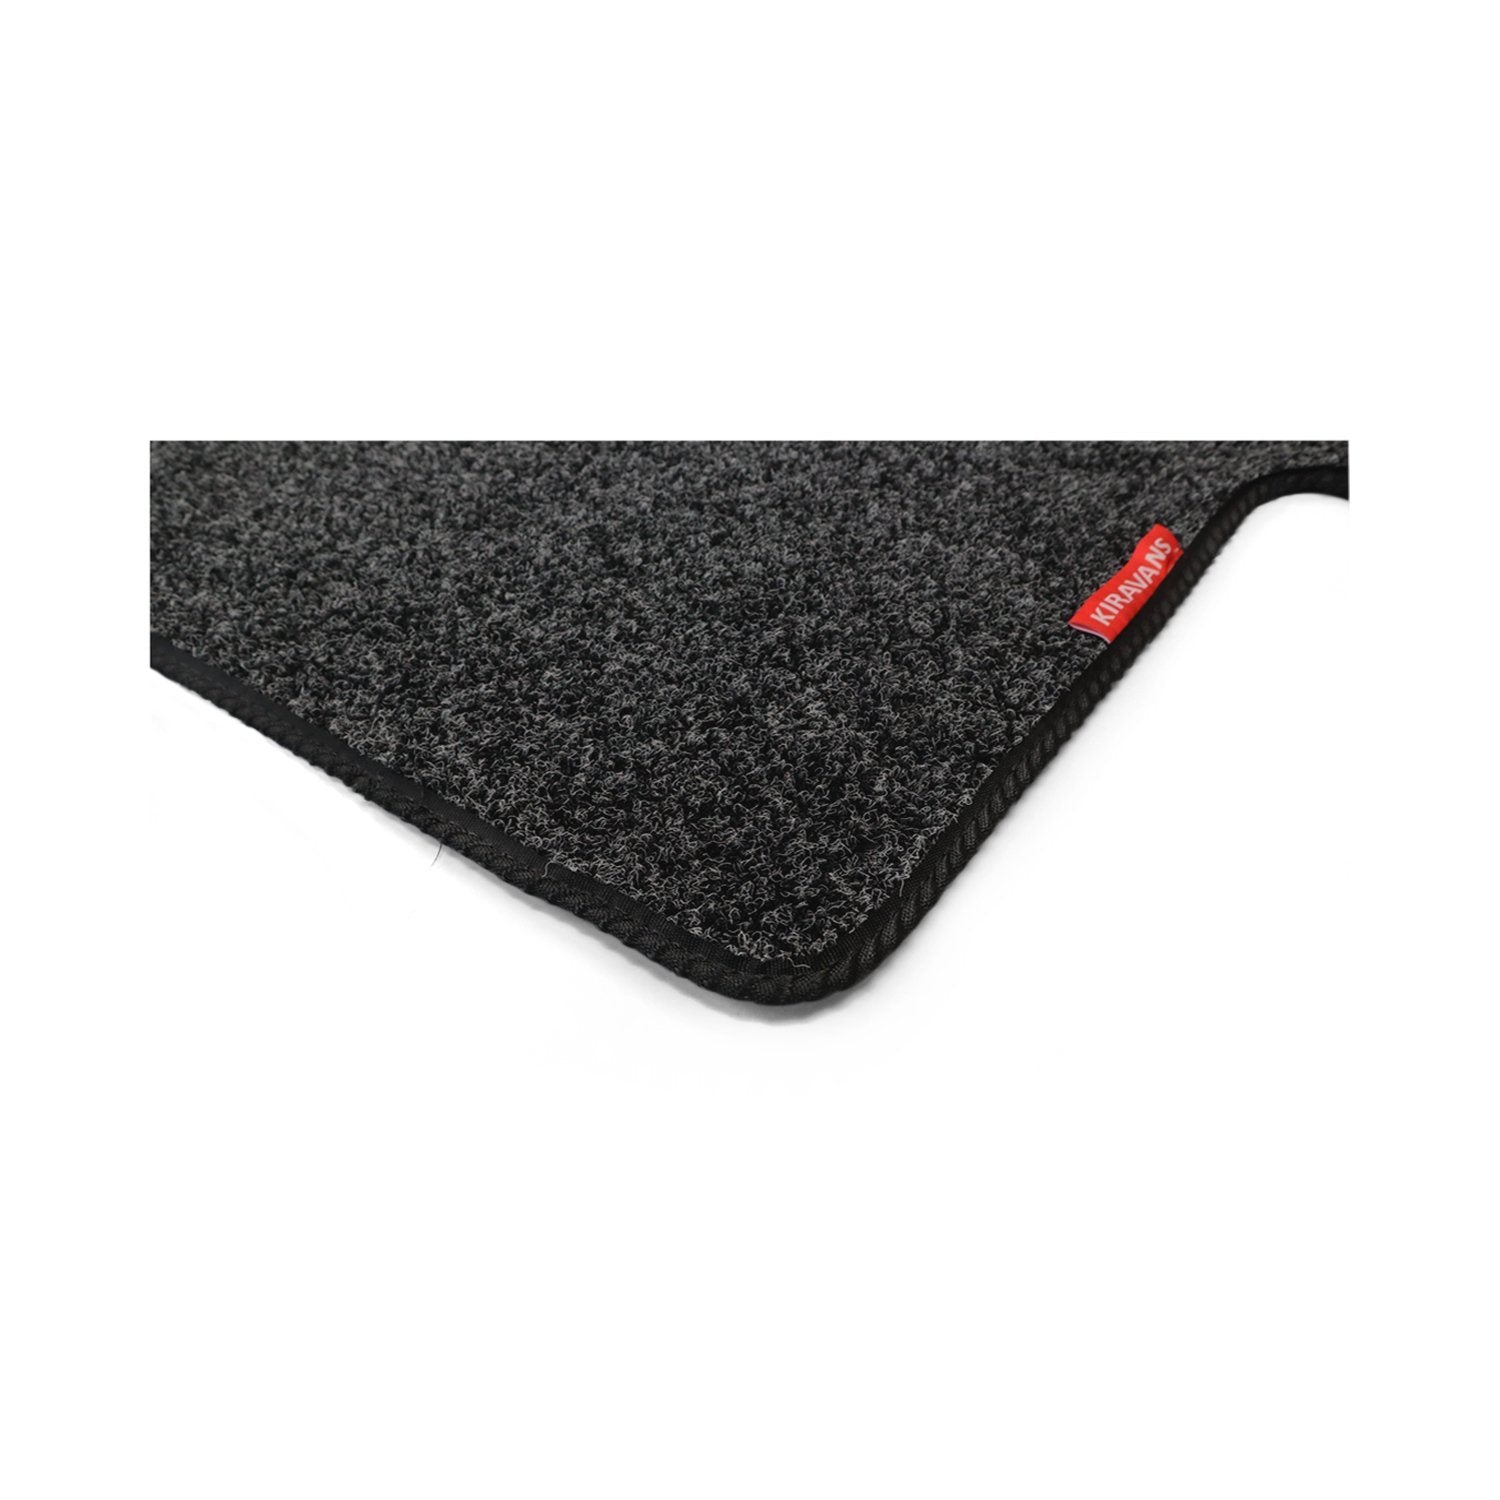 Cab Mat - For the VW T5/T6 Double Seat Swivel (Left Hand Drive) Designed by Kiravans Anthracite with Black Trim